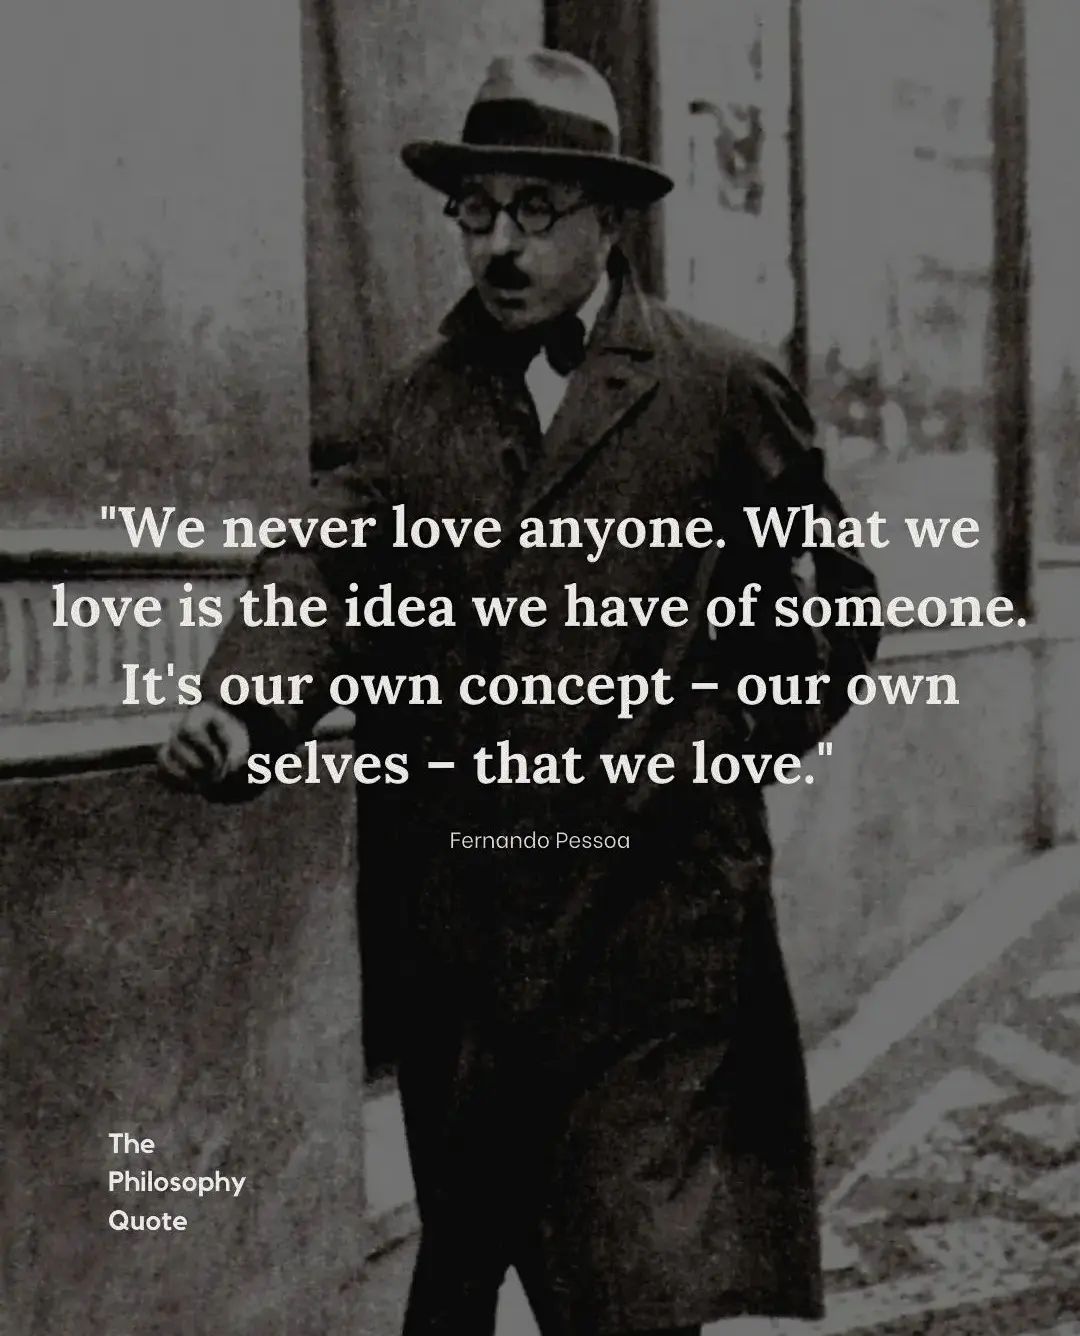 We never love anyone. What we love is the idea we have of someone. It’s our own concept—our own selves—that we love.